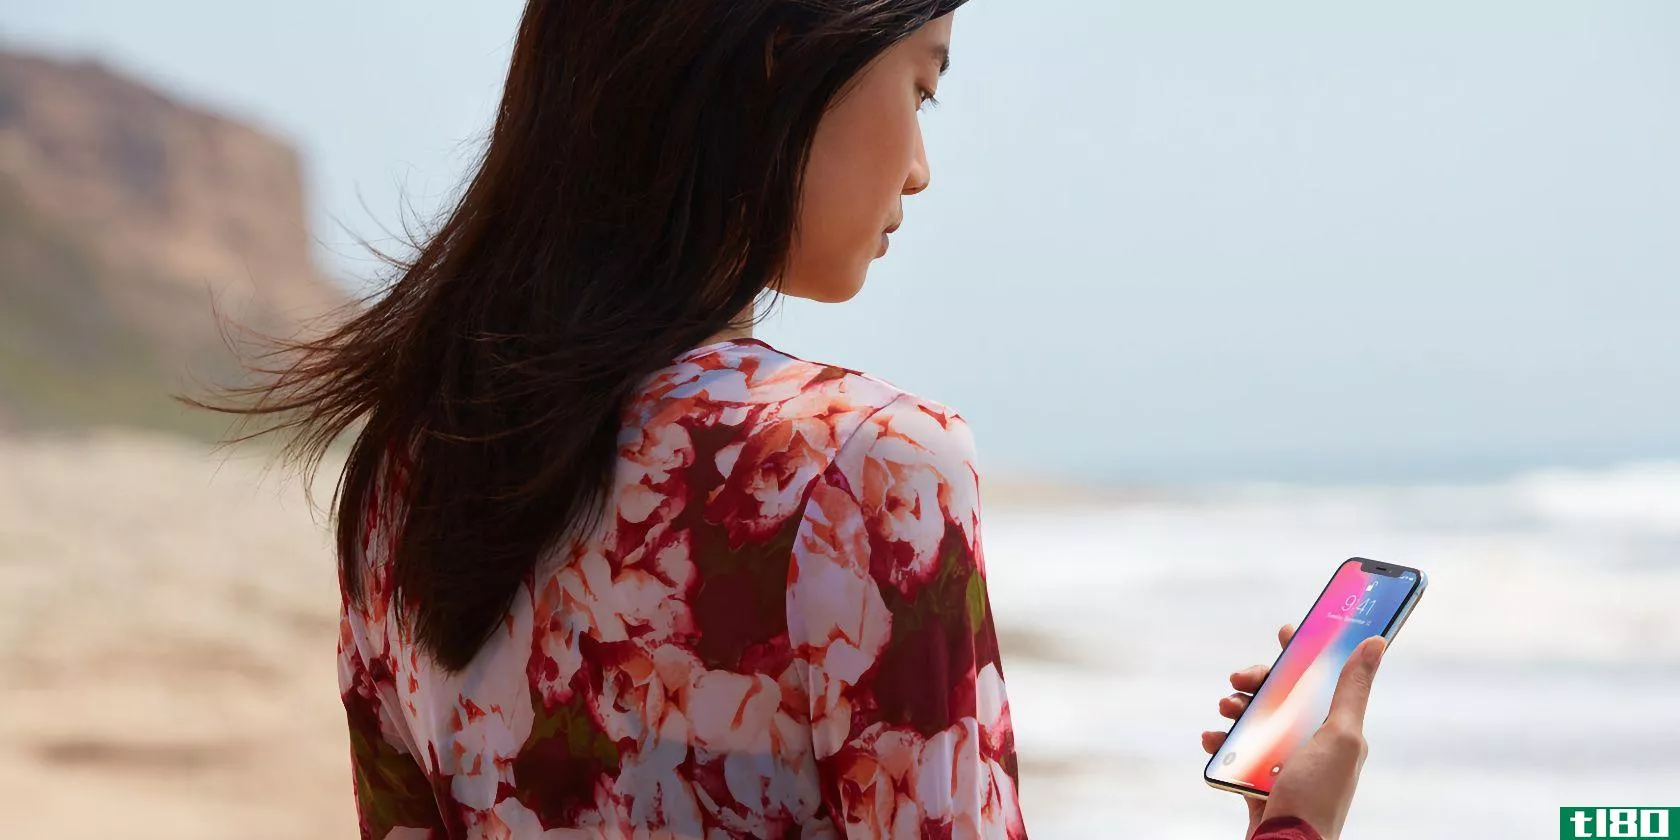 A photograph showing a young woman standing at the beach and looking at her iPhone X